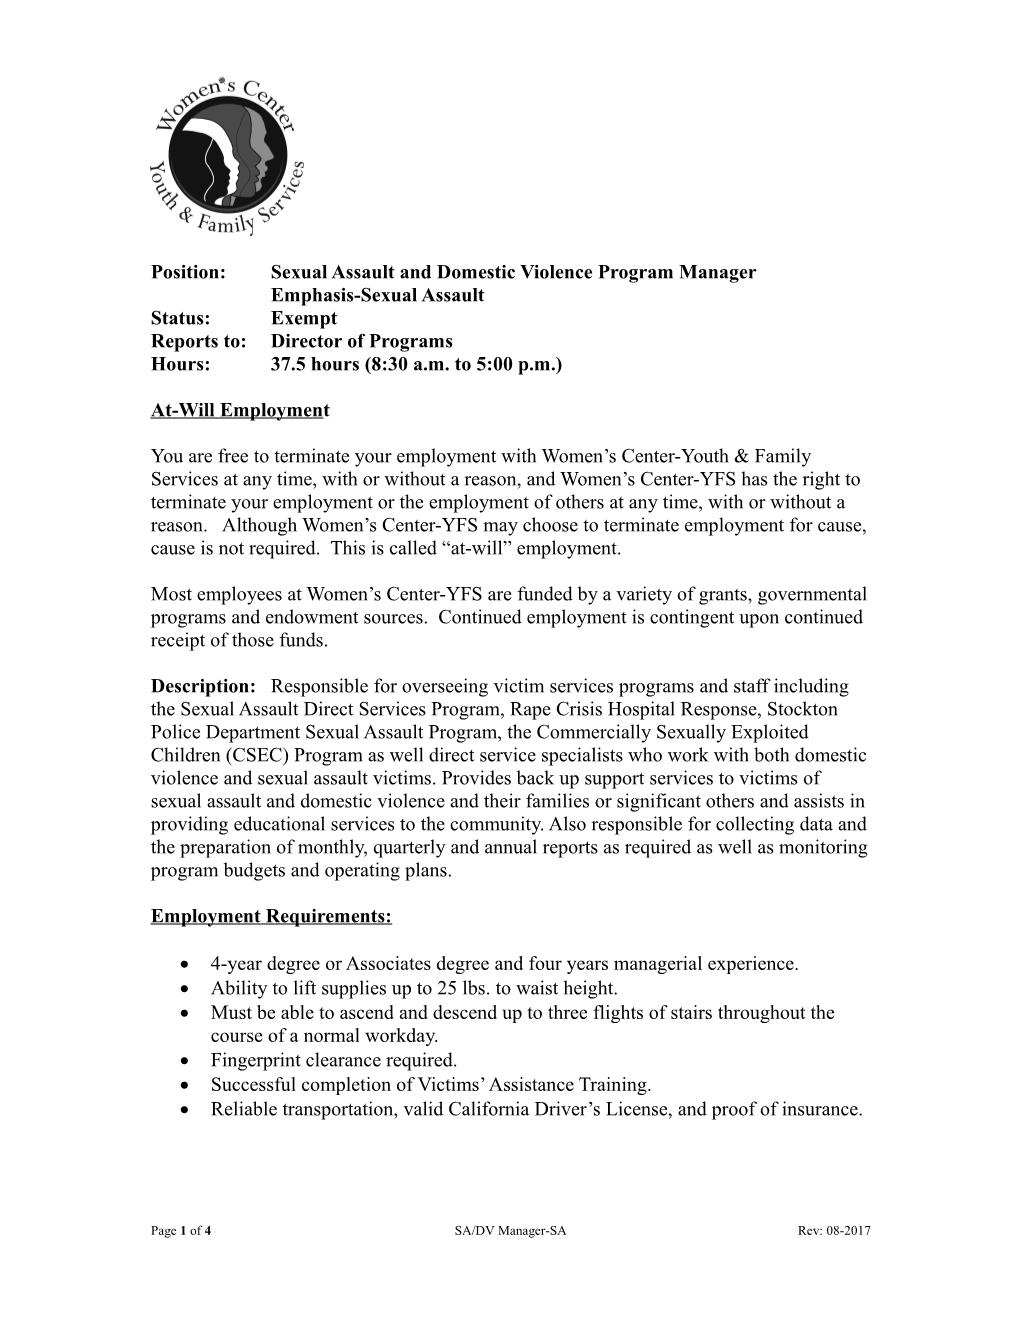 Position:Sexual Assault and Domestic Violence Program Manager